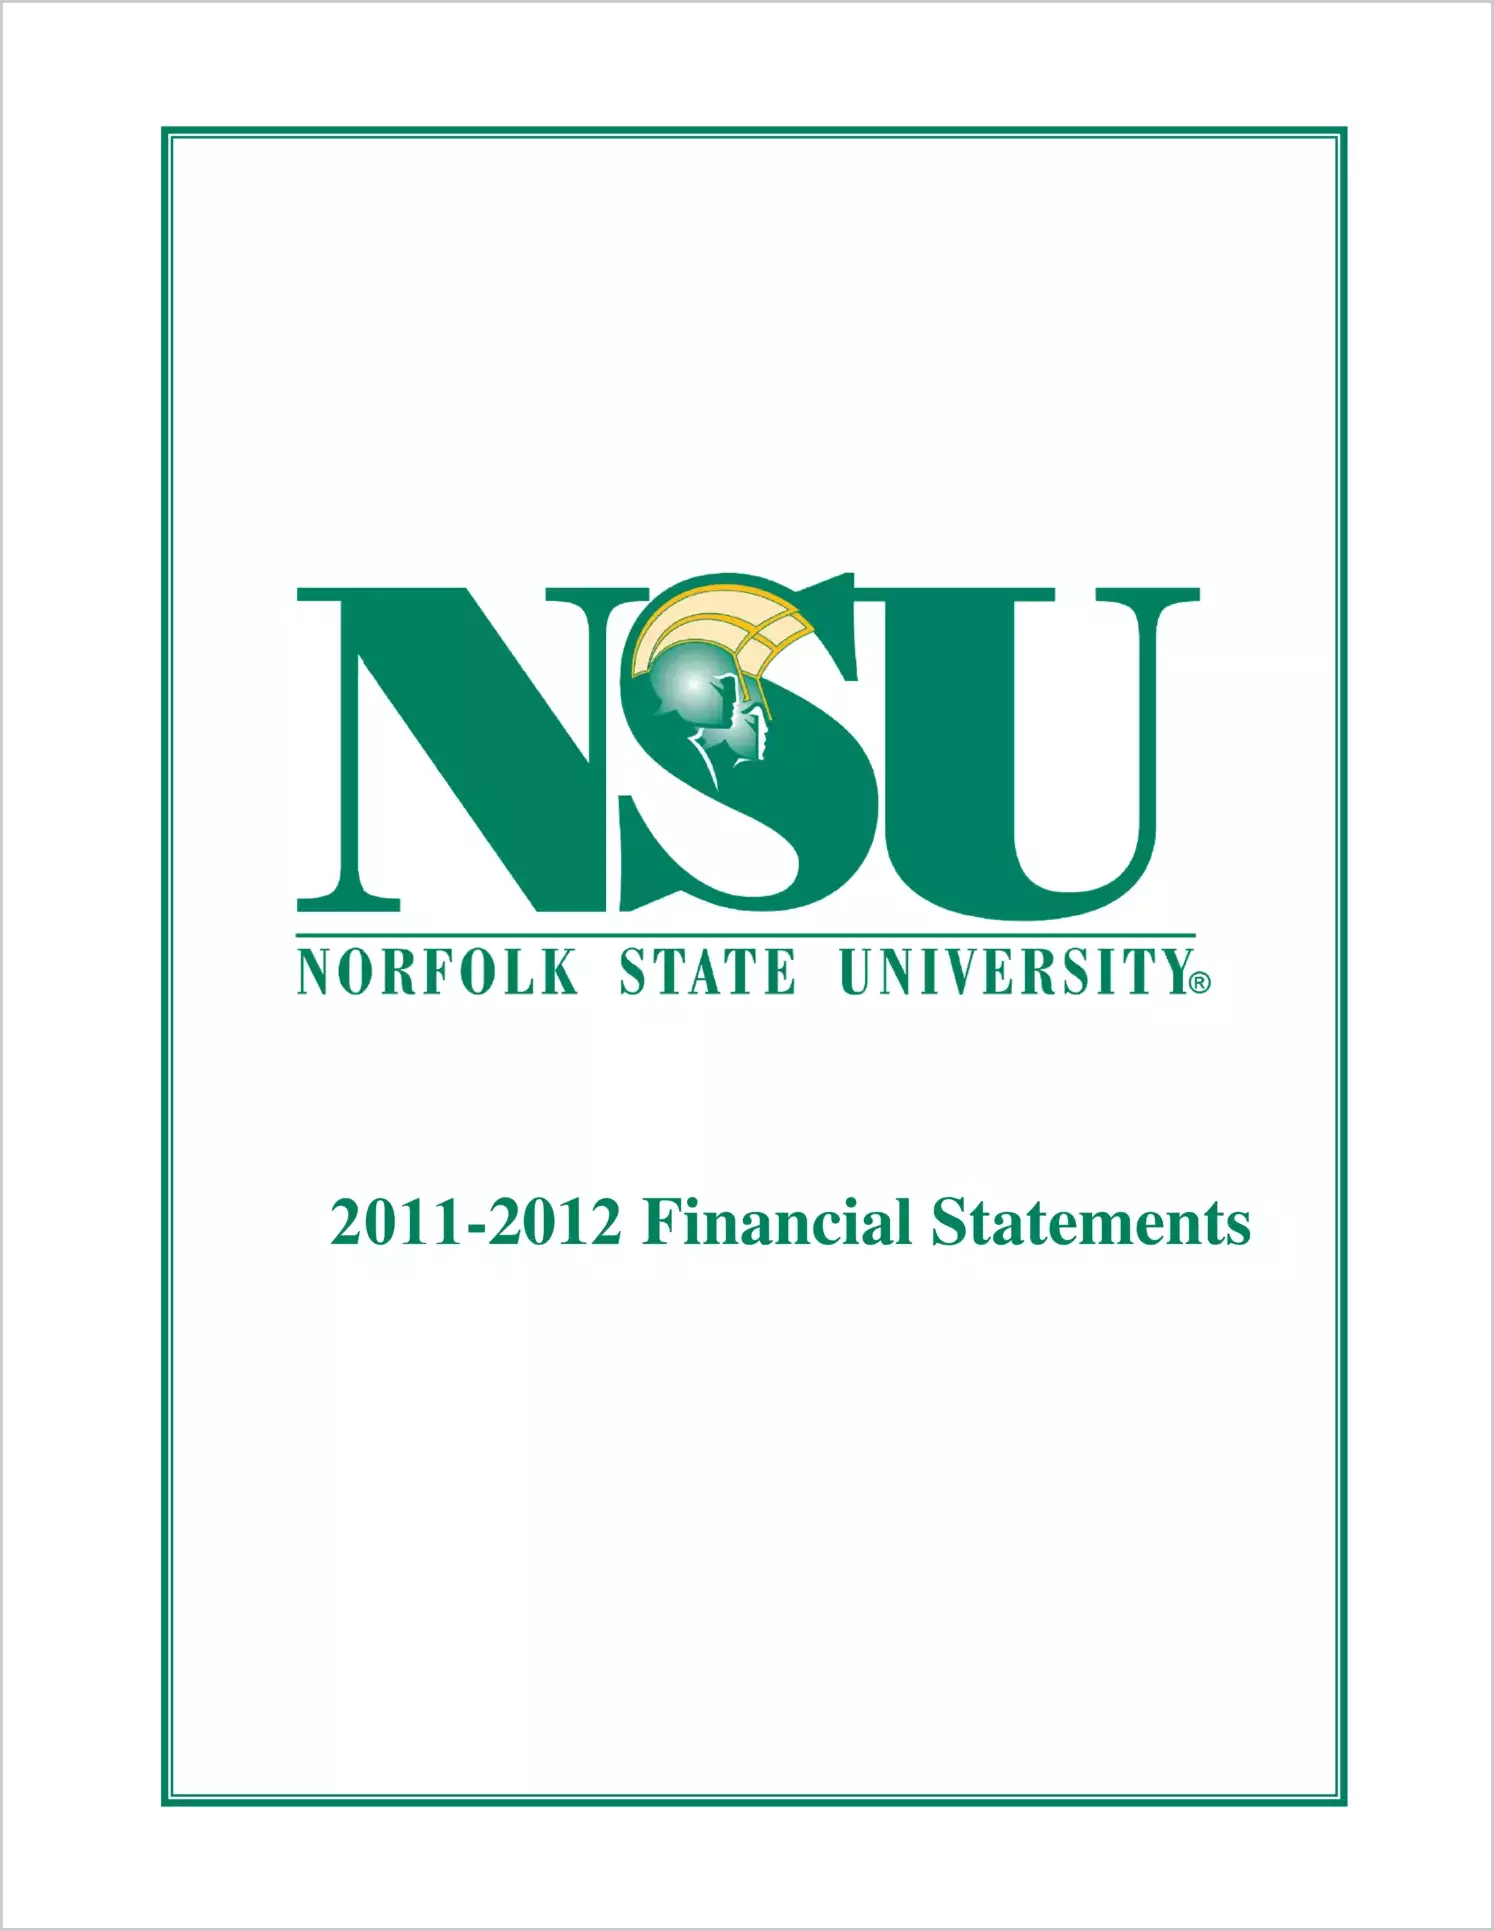 Norfolk State University Financial Statement Report for the year ended June 30, 2012